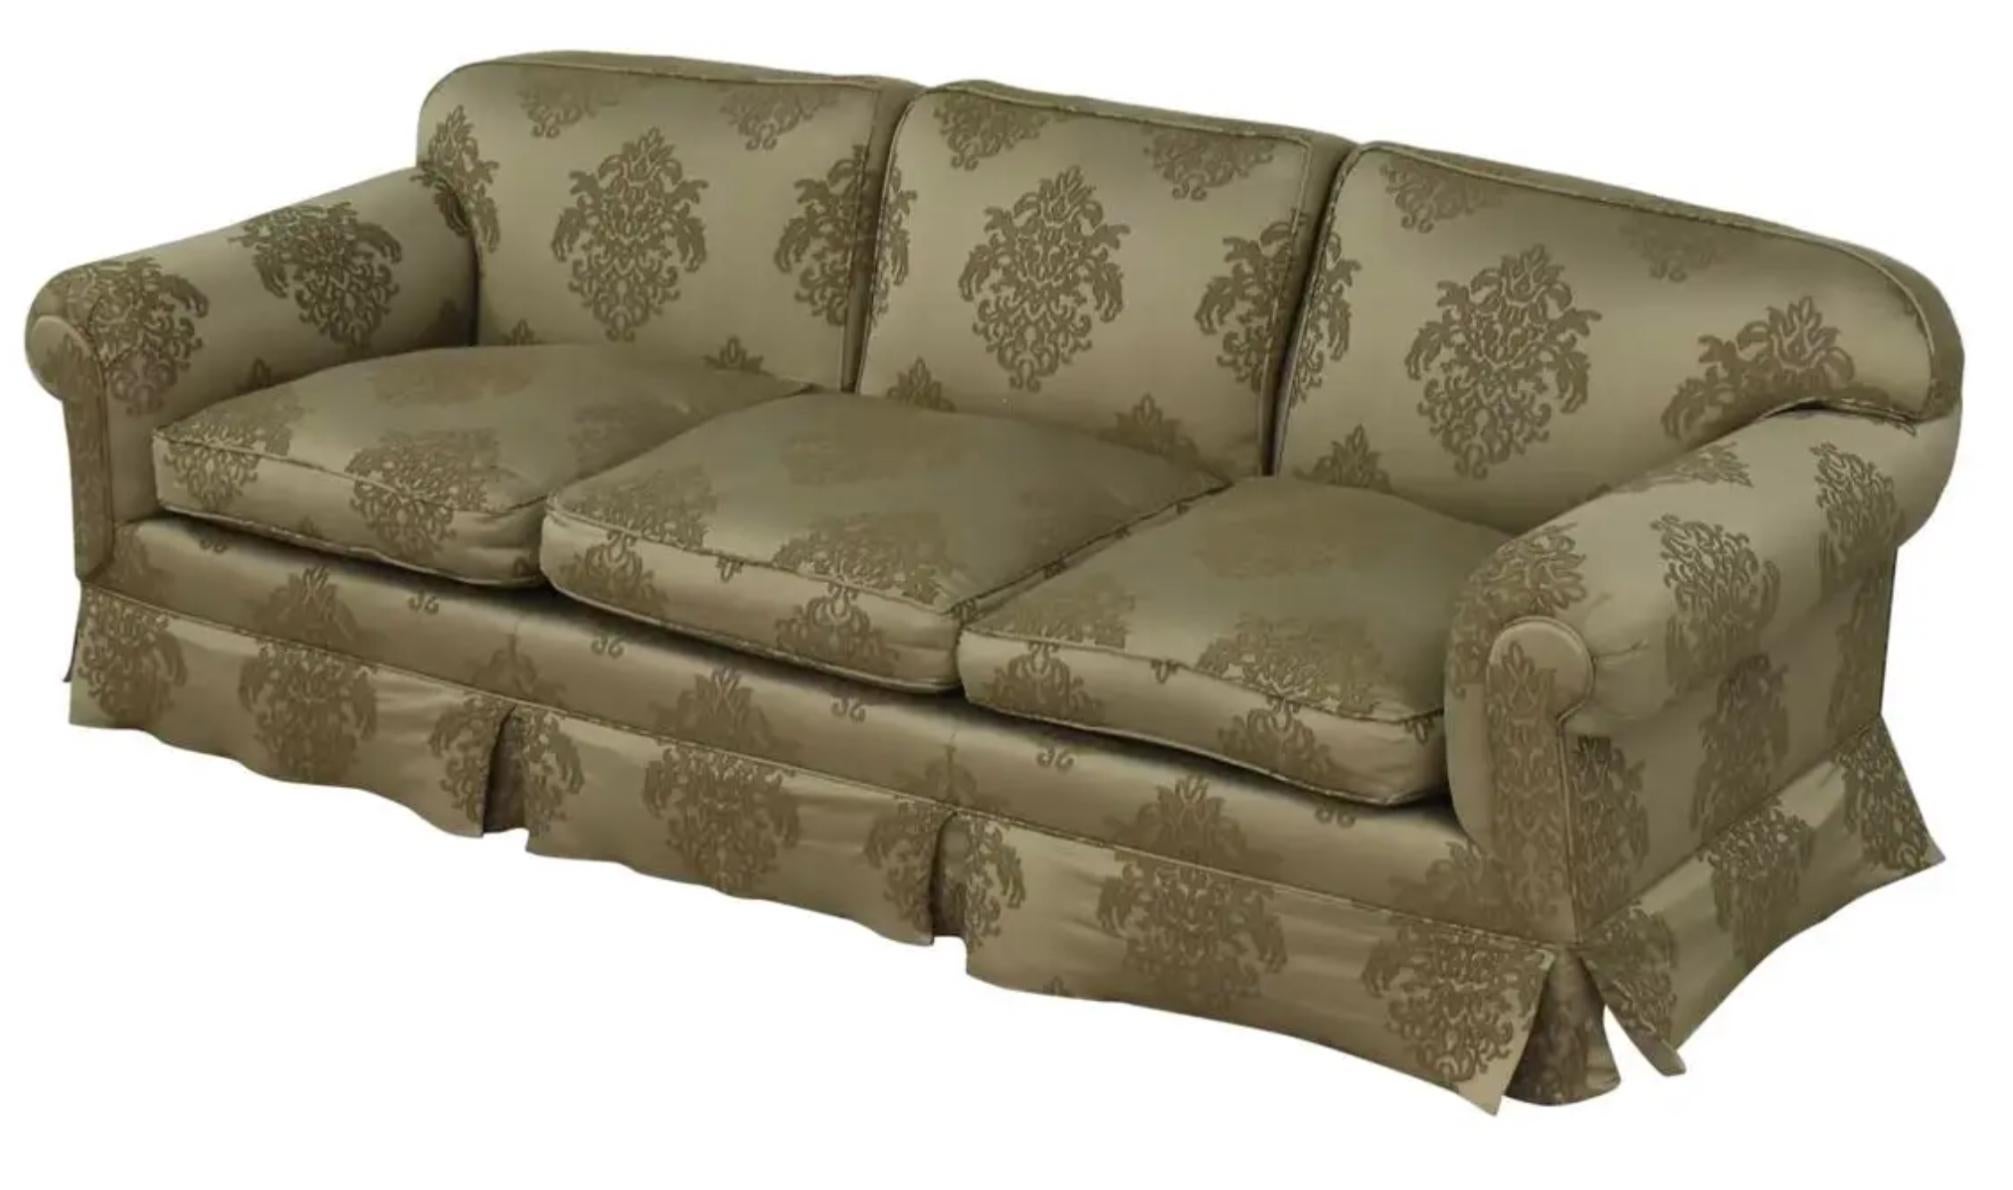 Modern Gregorius Pineo Damask Upholstered Olive Green Roll Arm Sofa Settee